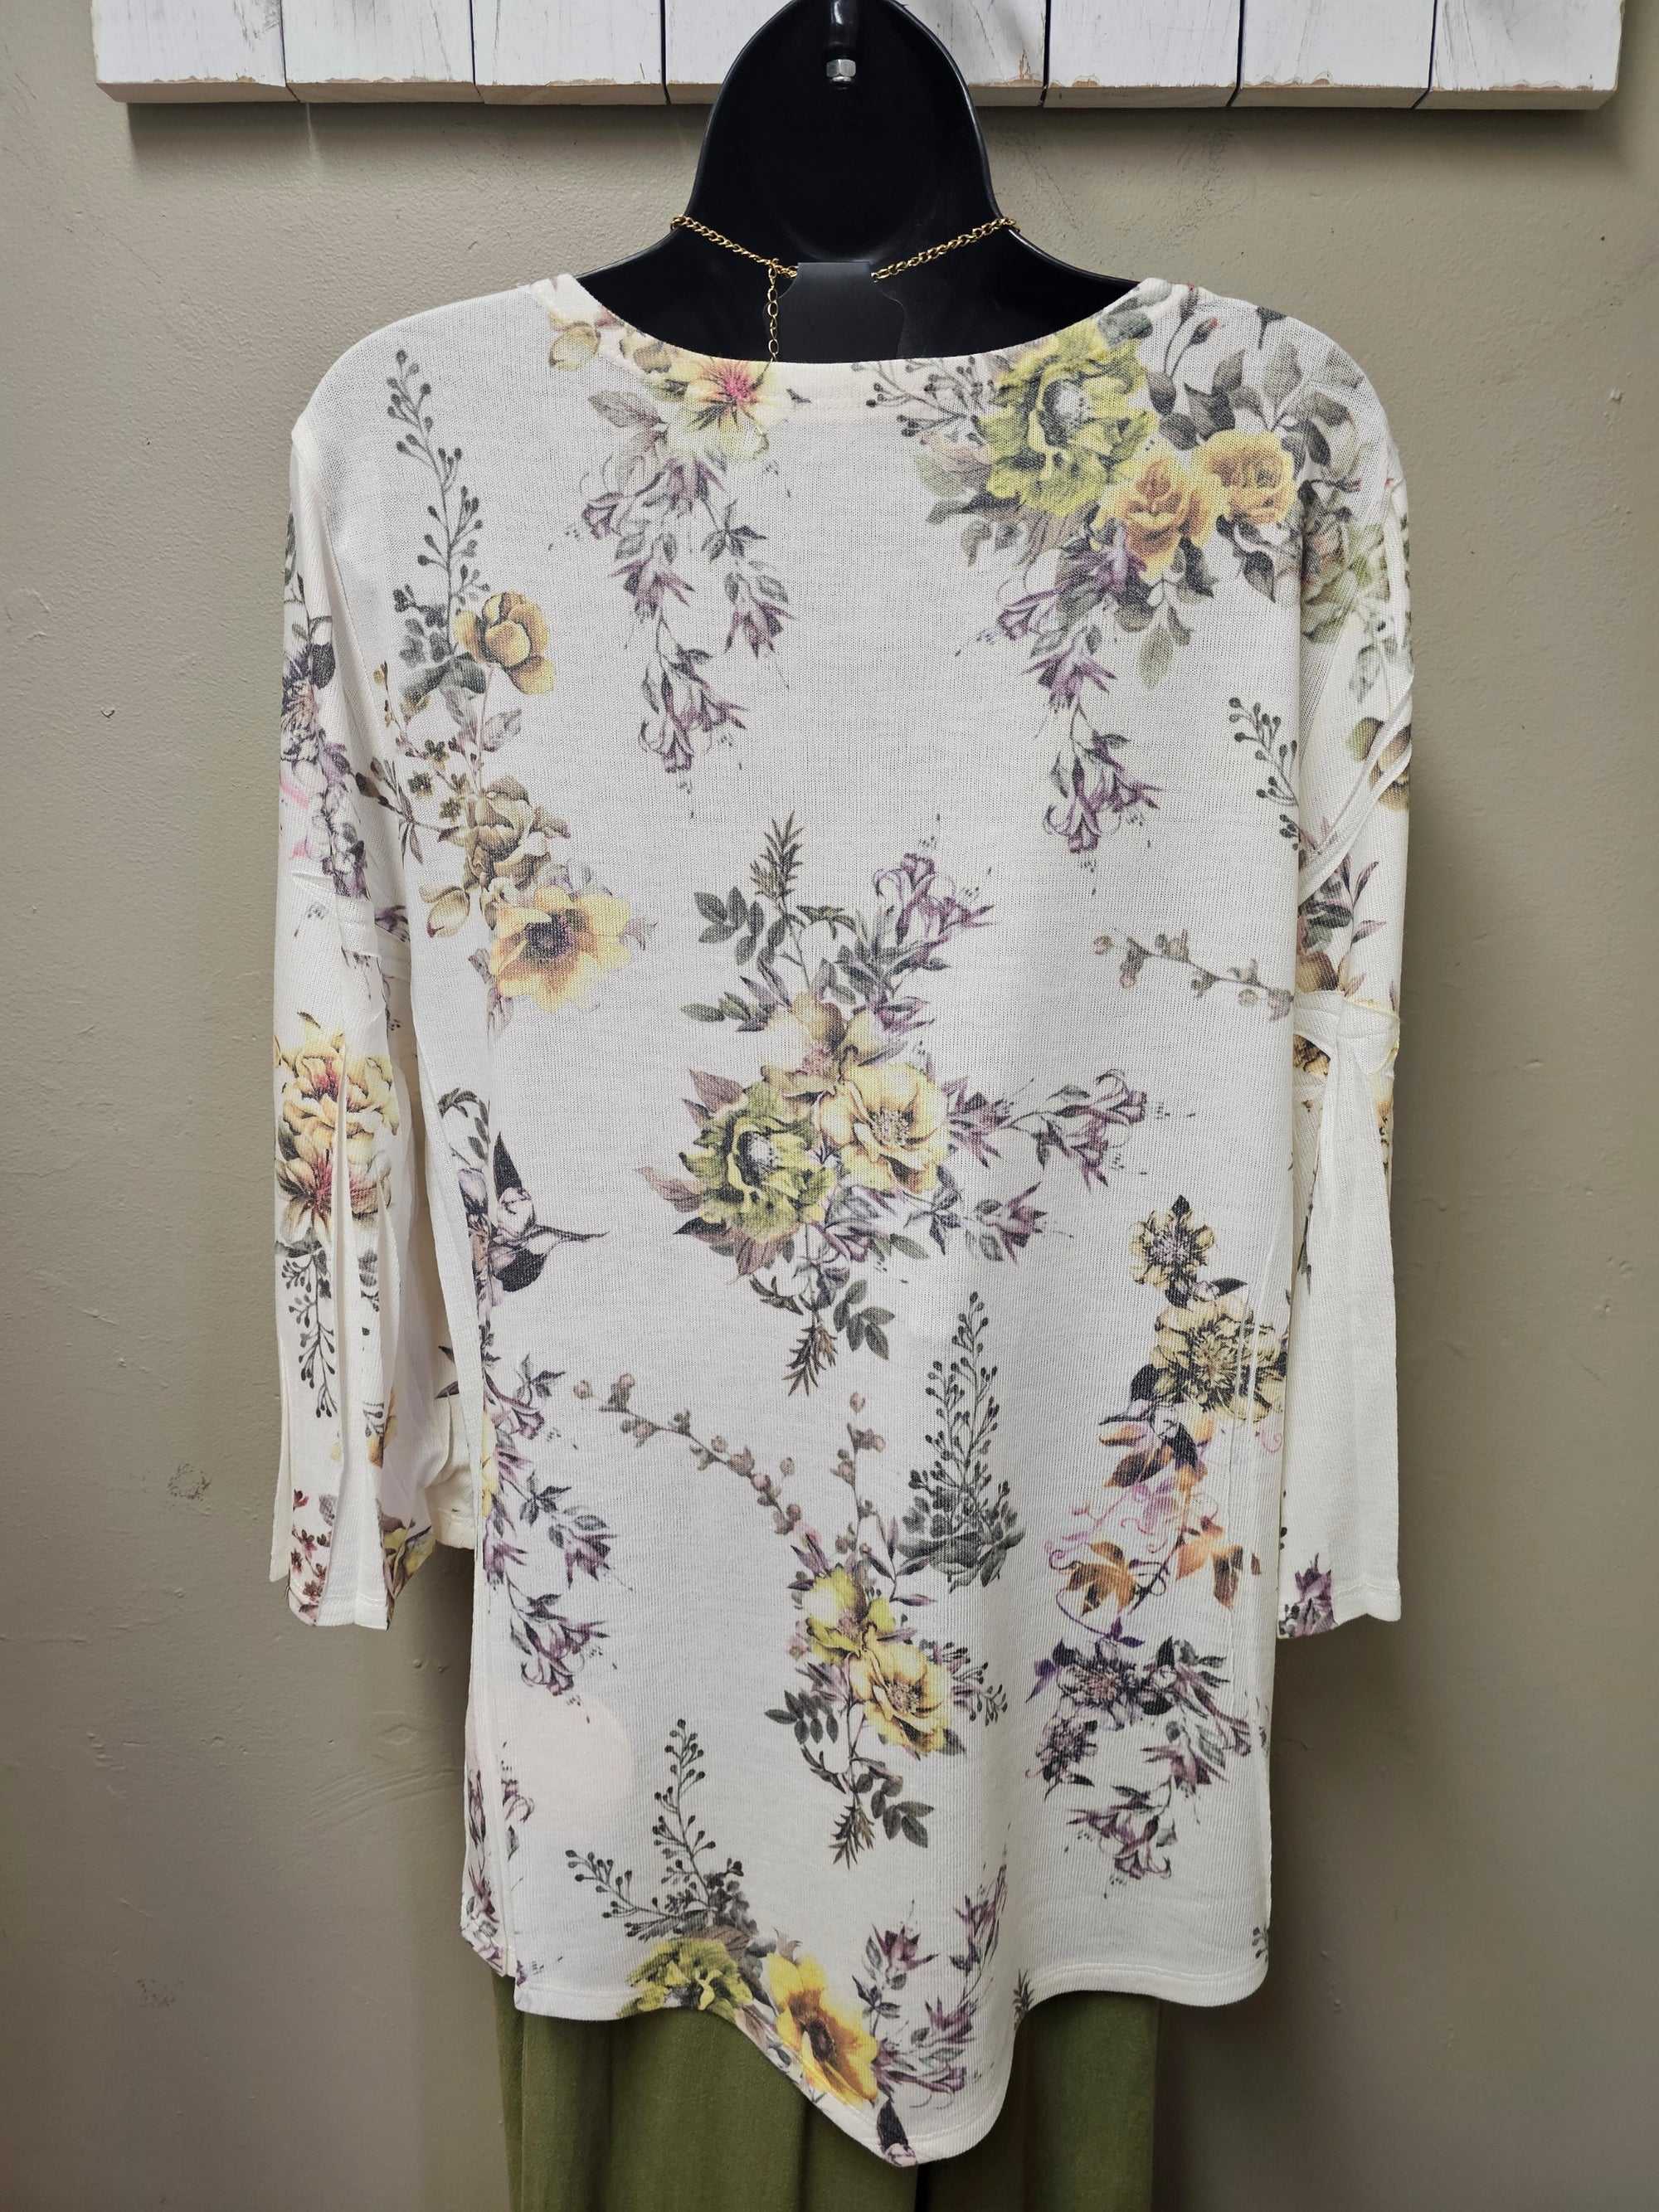 Beautiful Light Sweater Ivory Yellow Floral Top with Sleeves